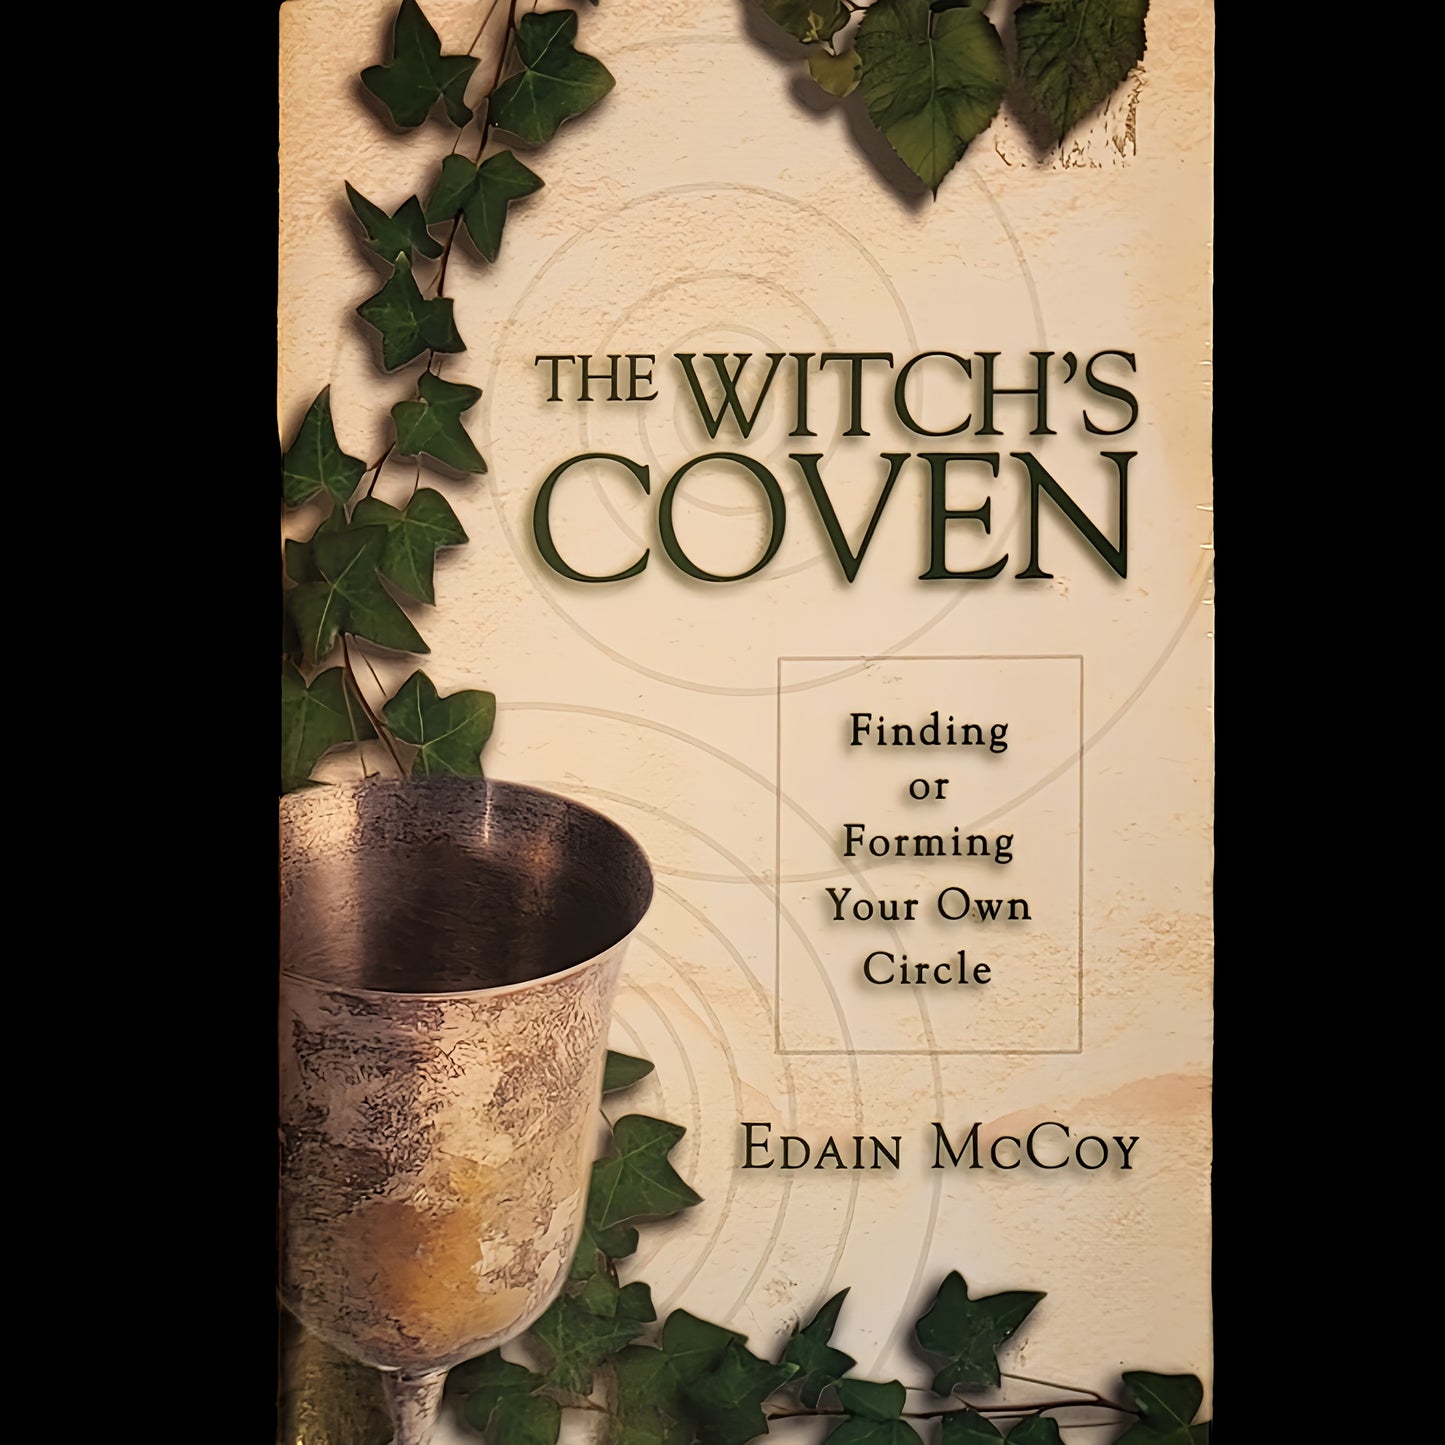 (Pre-Loved) The Witch's Coven: Finding or Forming Your Own Circle by Edain McCoy